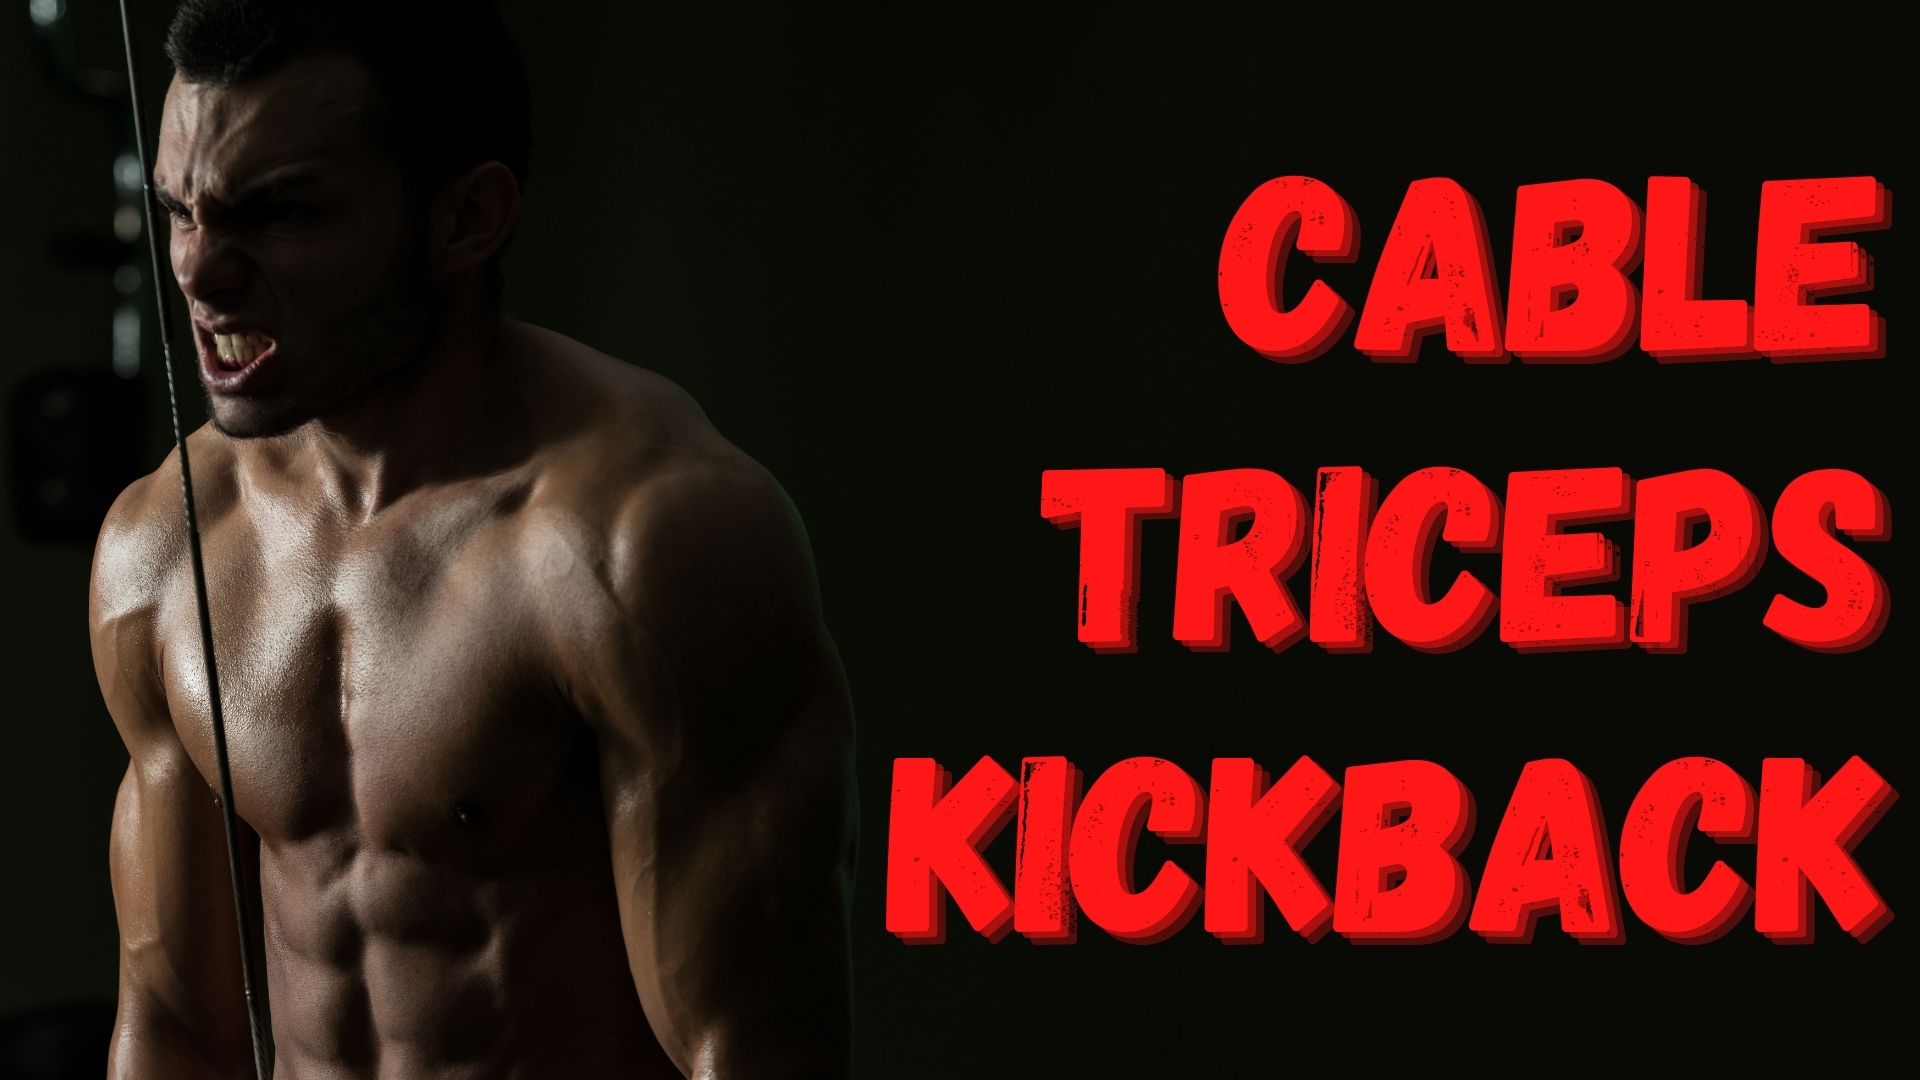 Cable Triceps Kickback: Essential Exercise for Toned Arms